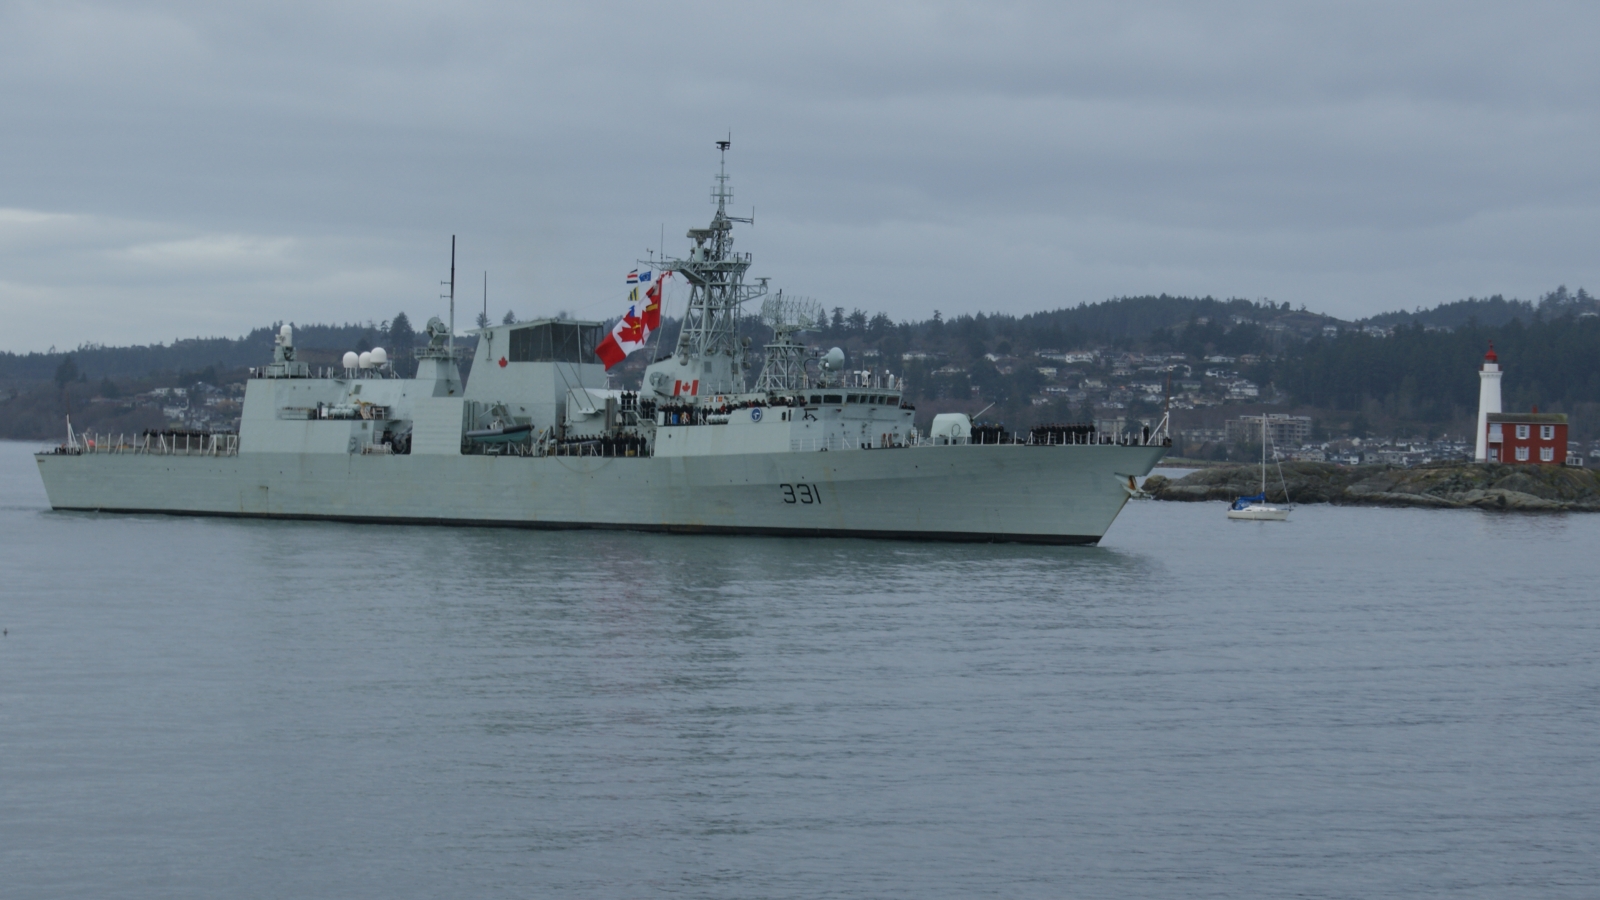 Hmcs Vancouver (Ffh 331) Wallpapers